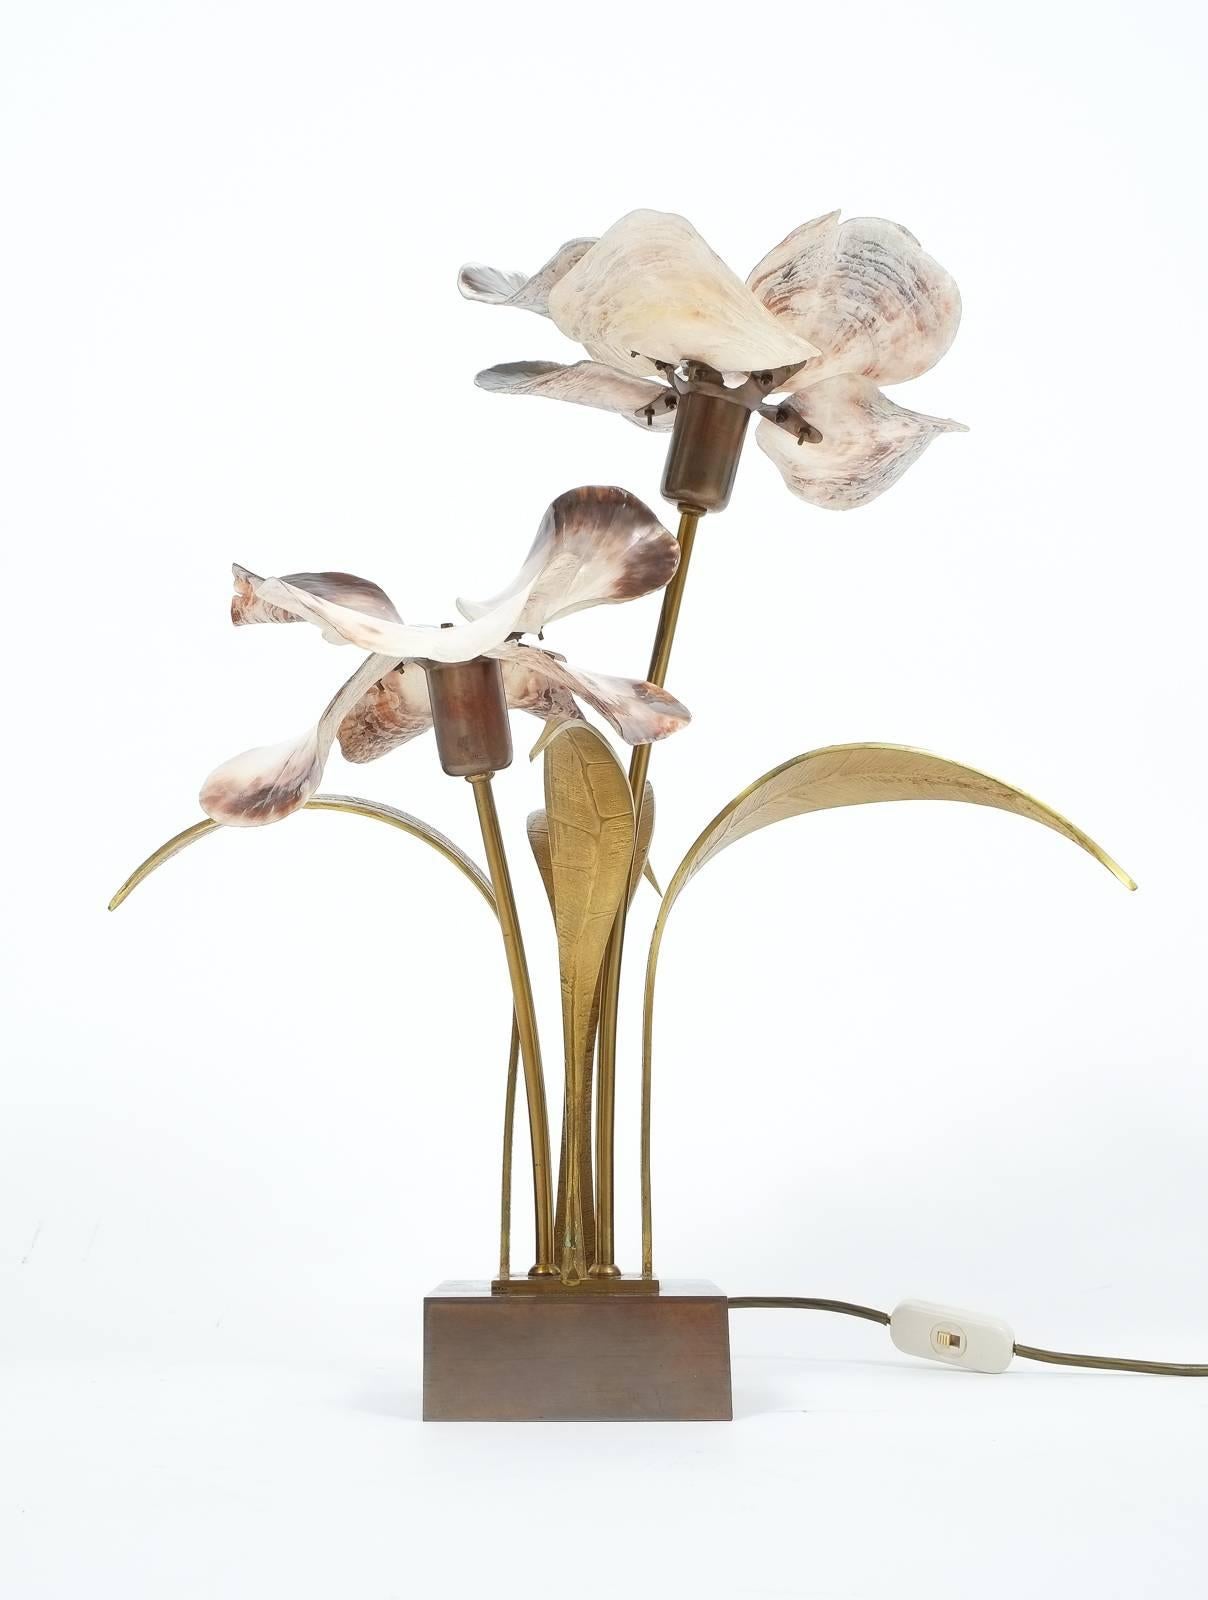 Beautifully table light by Willy Daro consisting of a bronze socket with brass leaves and capiz shell petals. The light has been executed with great love for material and detail. The condition is very good, with no chipping. Matching gold-tip bulbs